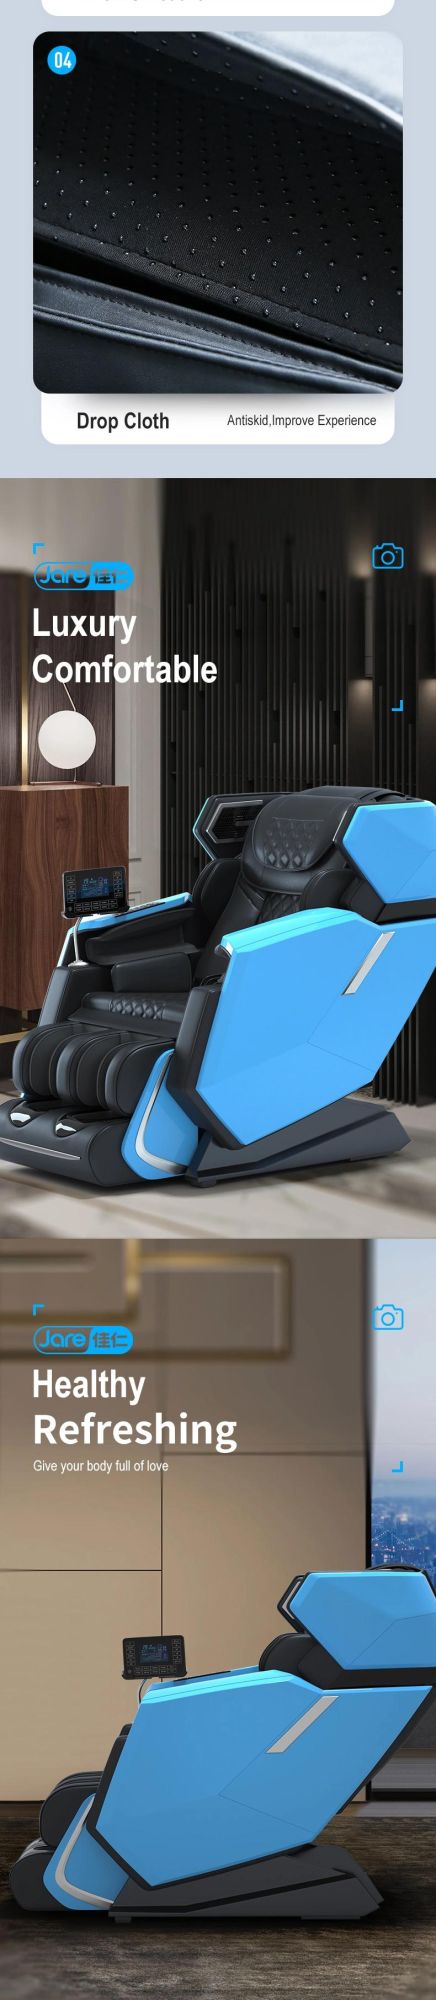 Jare A301 New Arrival OEM ODM Hot Sales Foot Massage Zero Gravity 4D Electric Heated Vibration SL-Track Full Body Massage Chair